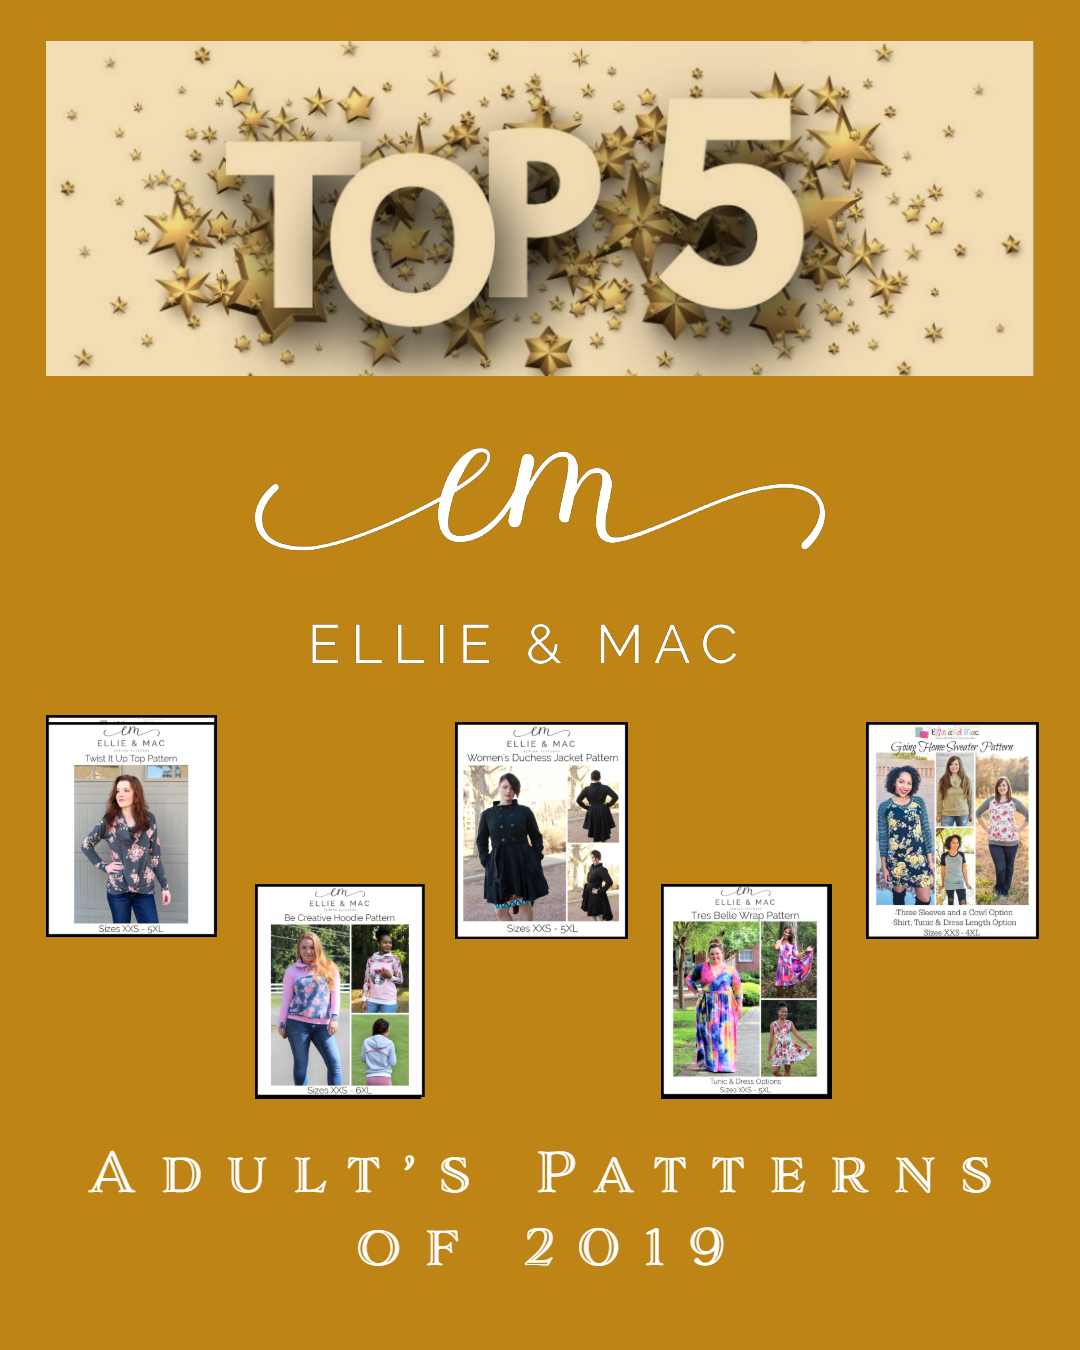 Our fantastic top 5 adult's patterns of 2019